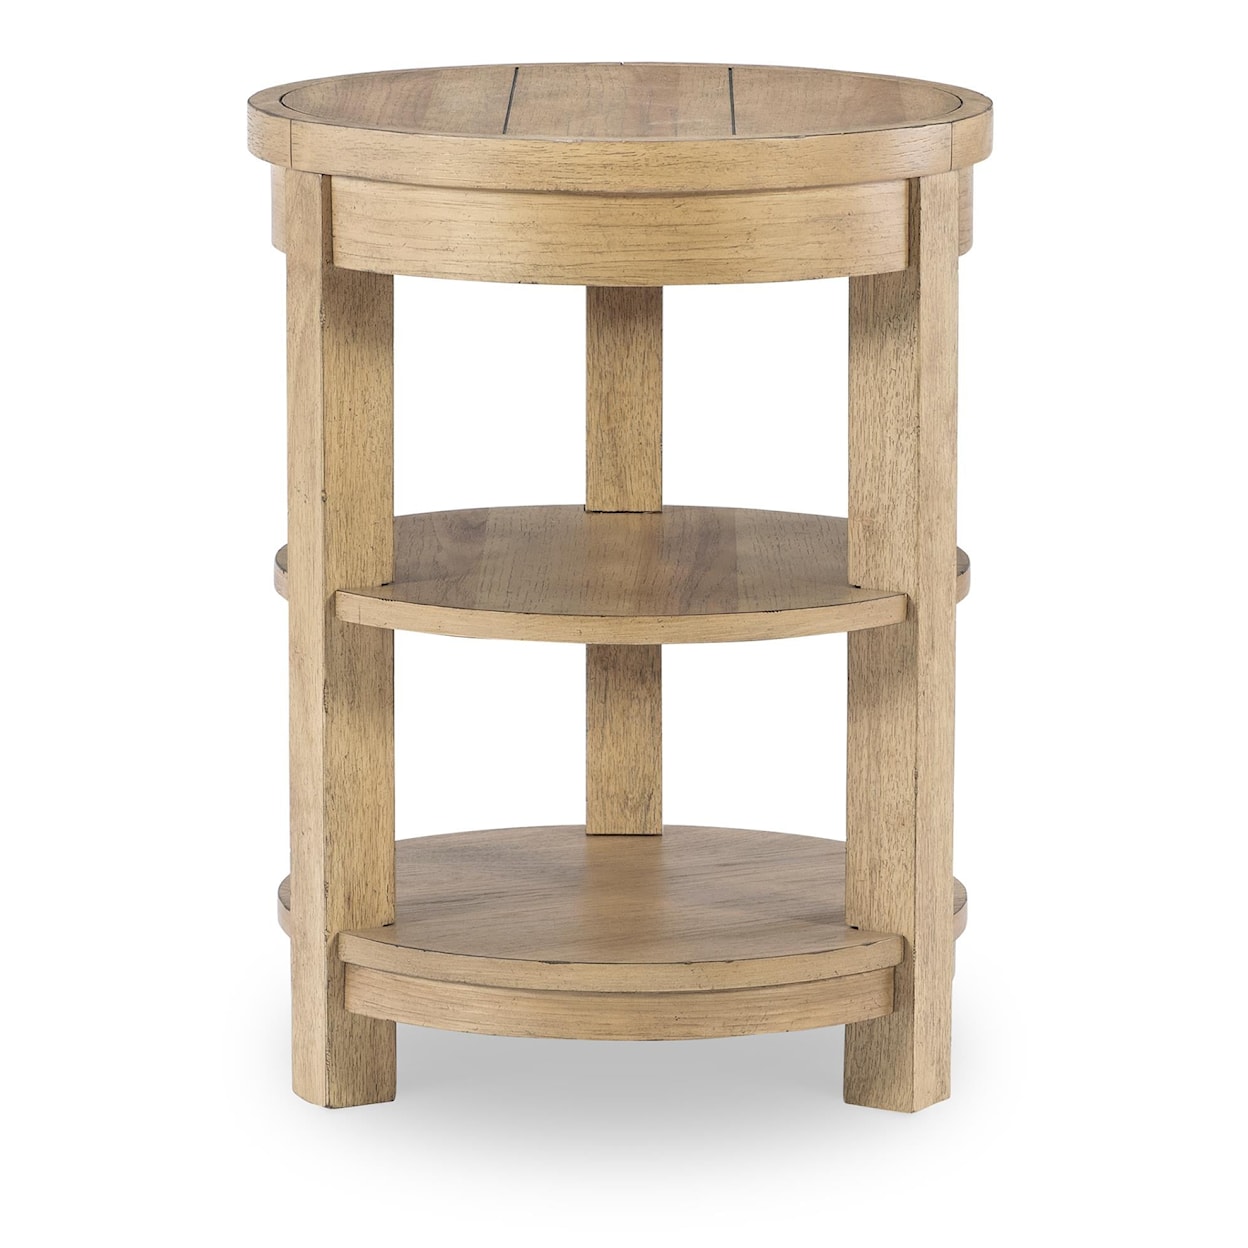 Trisha Yearwood Home Collection by Legacy Classic Today's Traditions Round Chairside Table